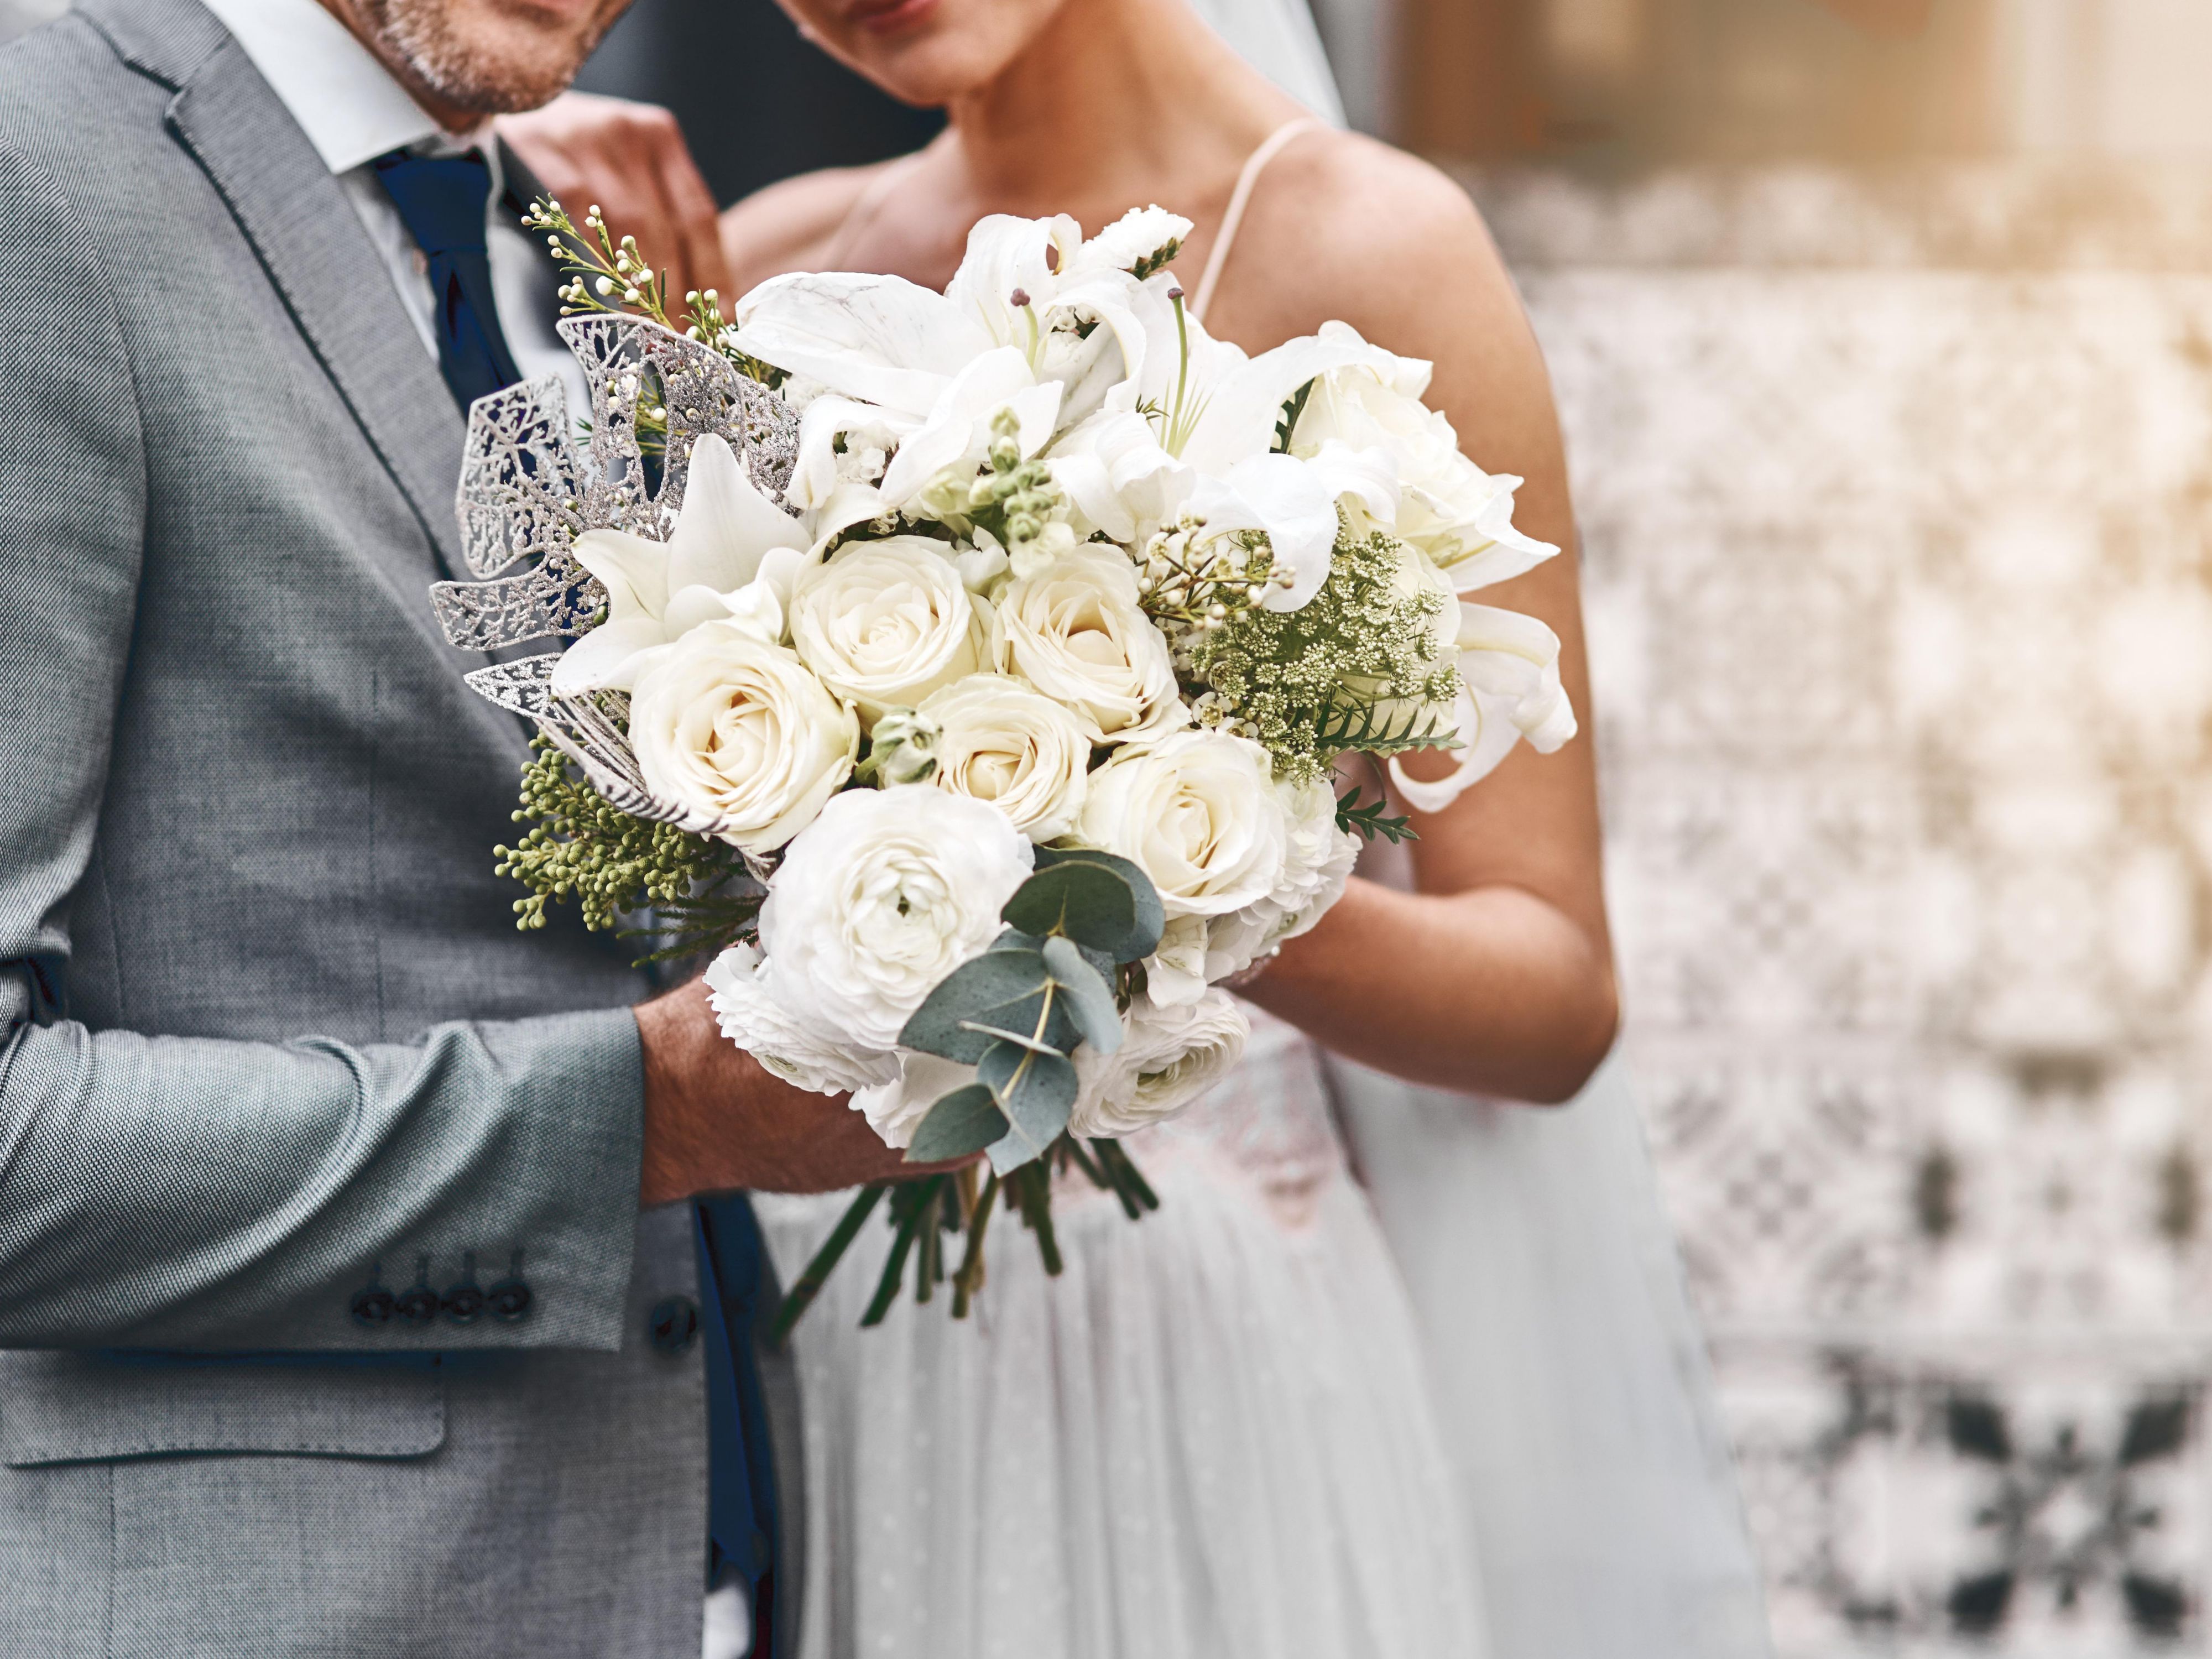 Calling all newly engaged couples. Plan your dream wedding at Holiday Inn & Suites Cedar Falls. Host your guests and celebrate at Bien VenU Event Center, our adjacent venue with elegant ballrooms for 150-1000 guests. Our expert staff is ready to assist with AV, decor, and in-house catering. Make your special day unforgettable with us. 